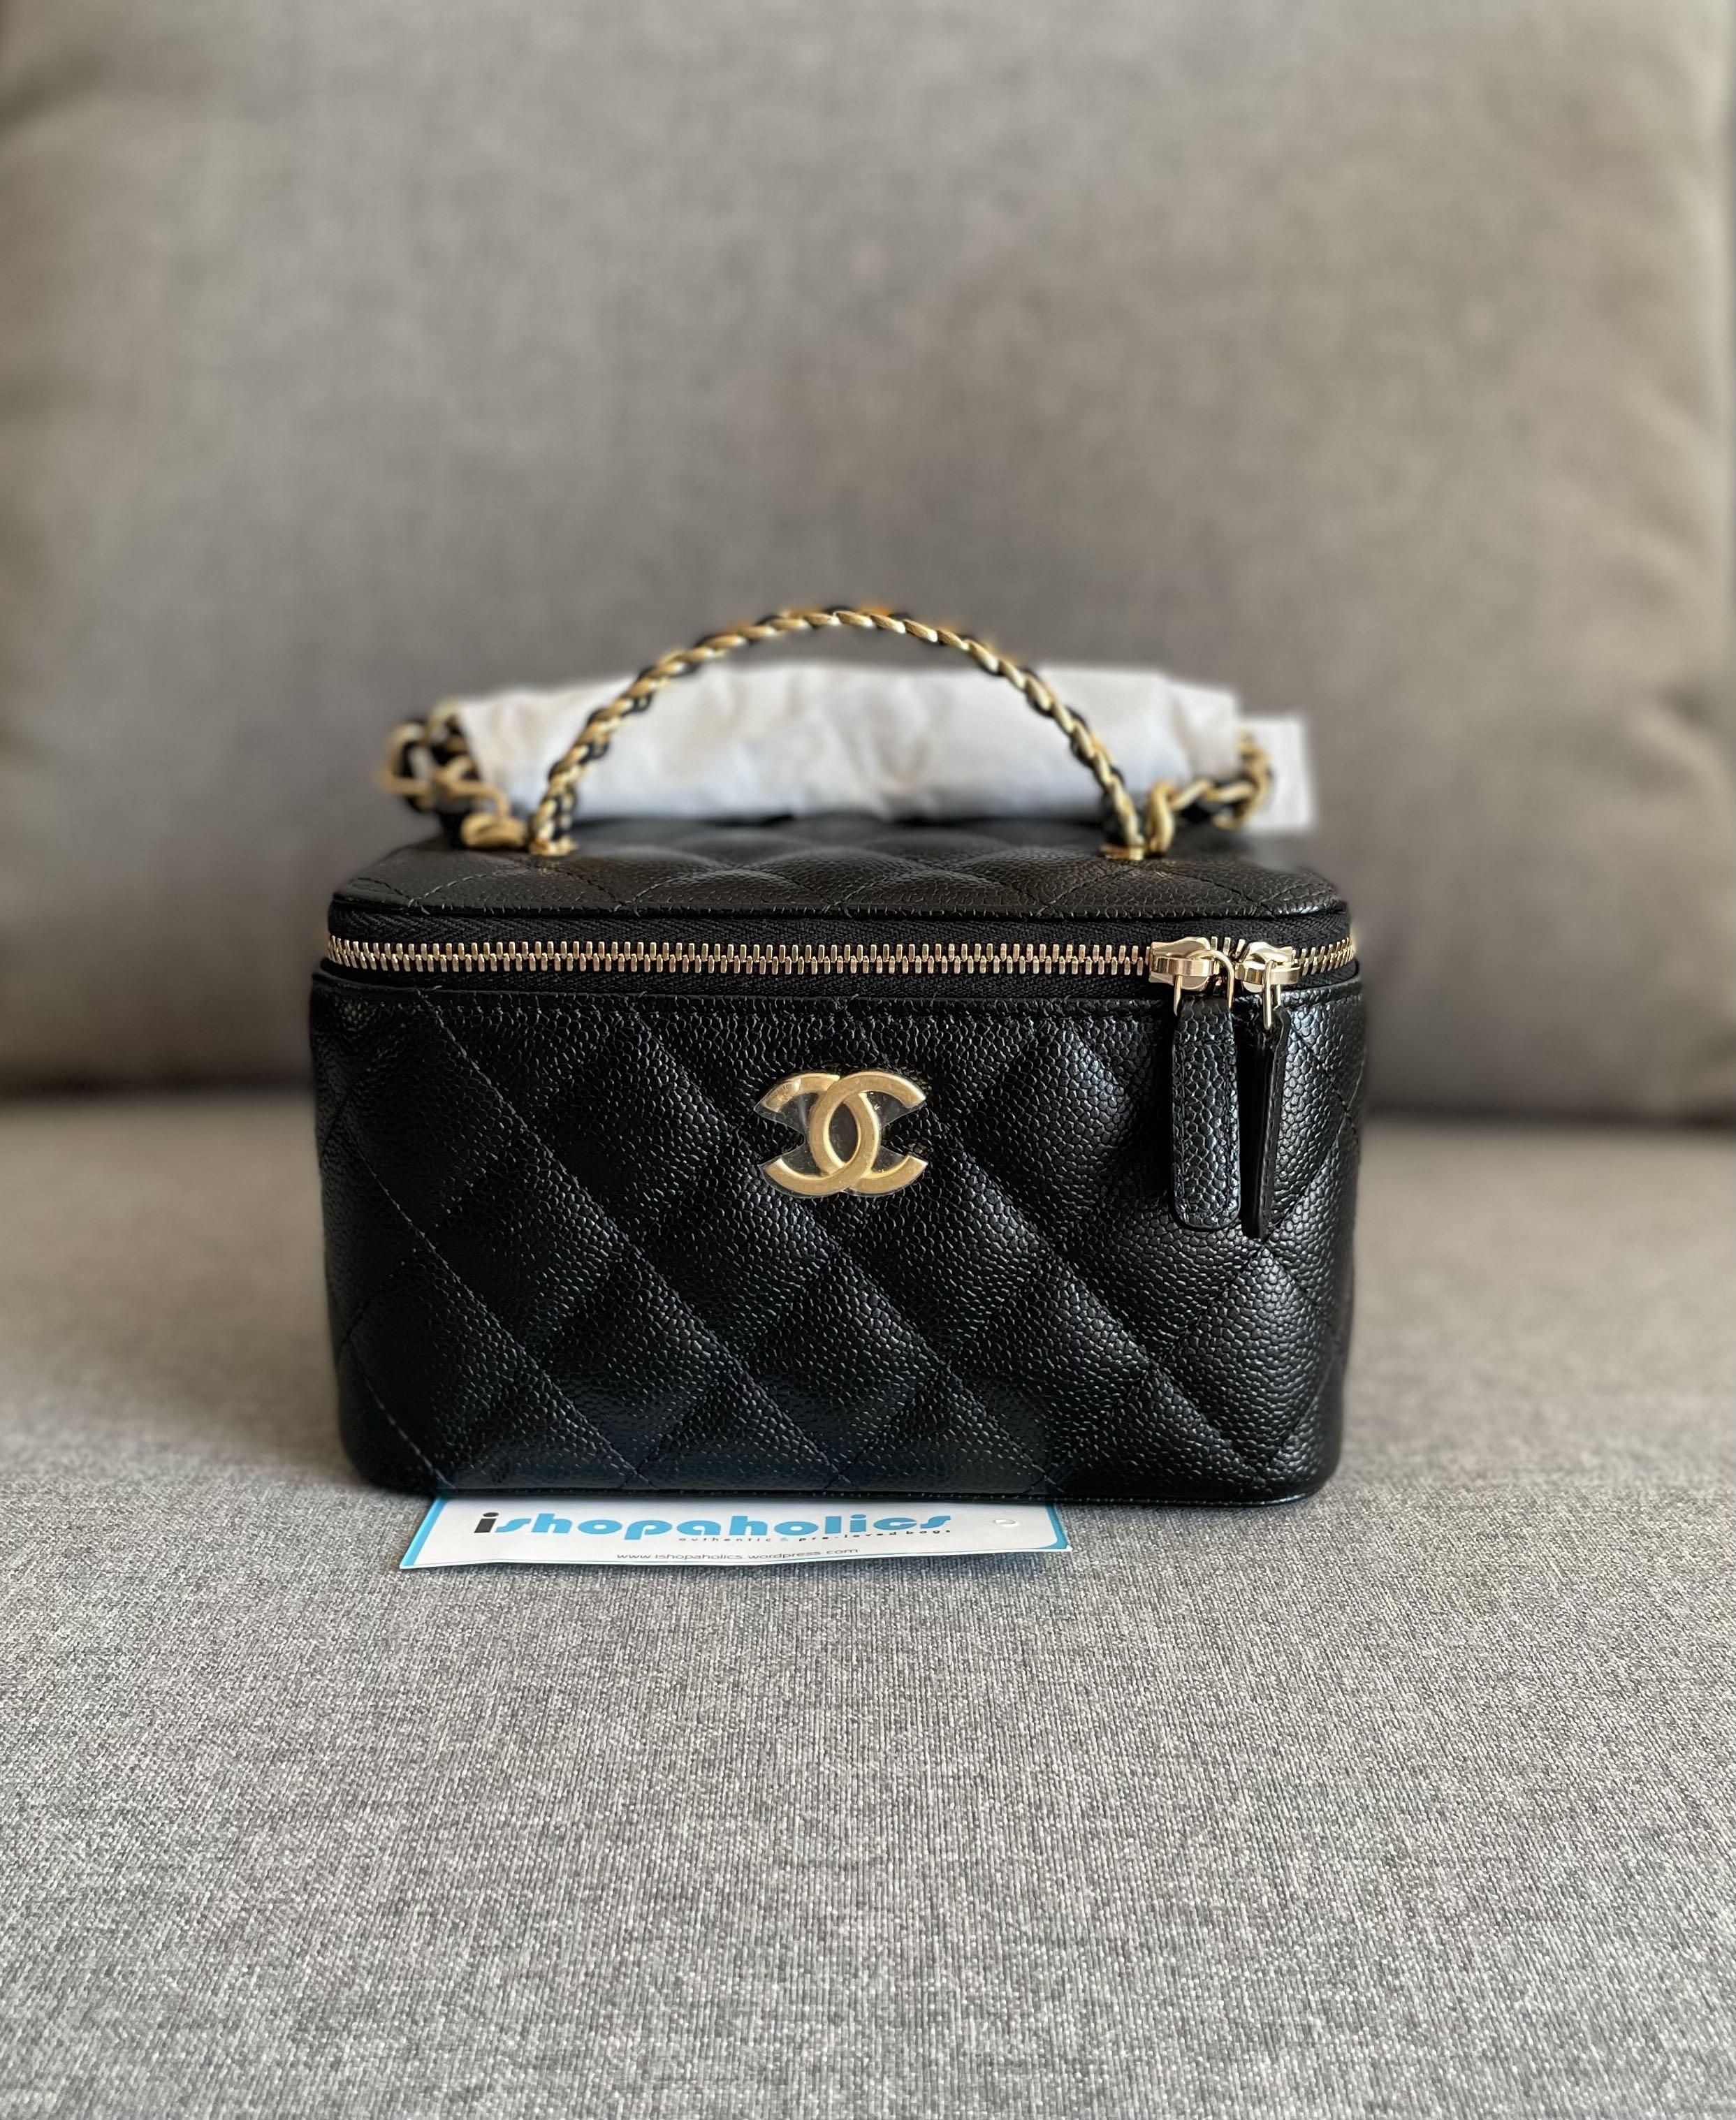 Chanel 22S Pick Me UP Black Caviar Hobo Bag with Antique Hardware 